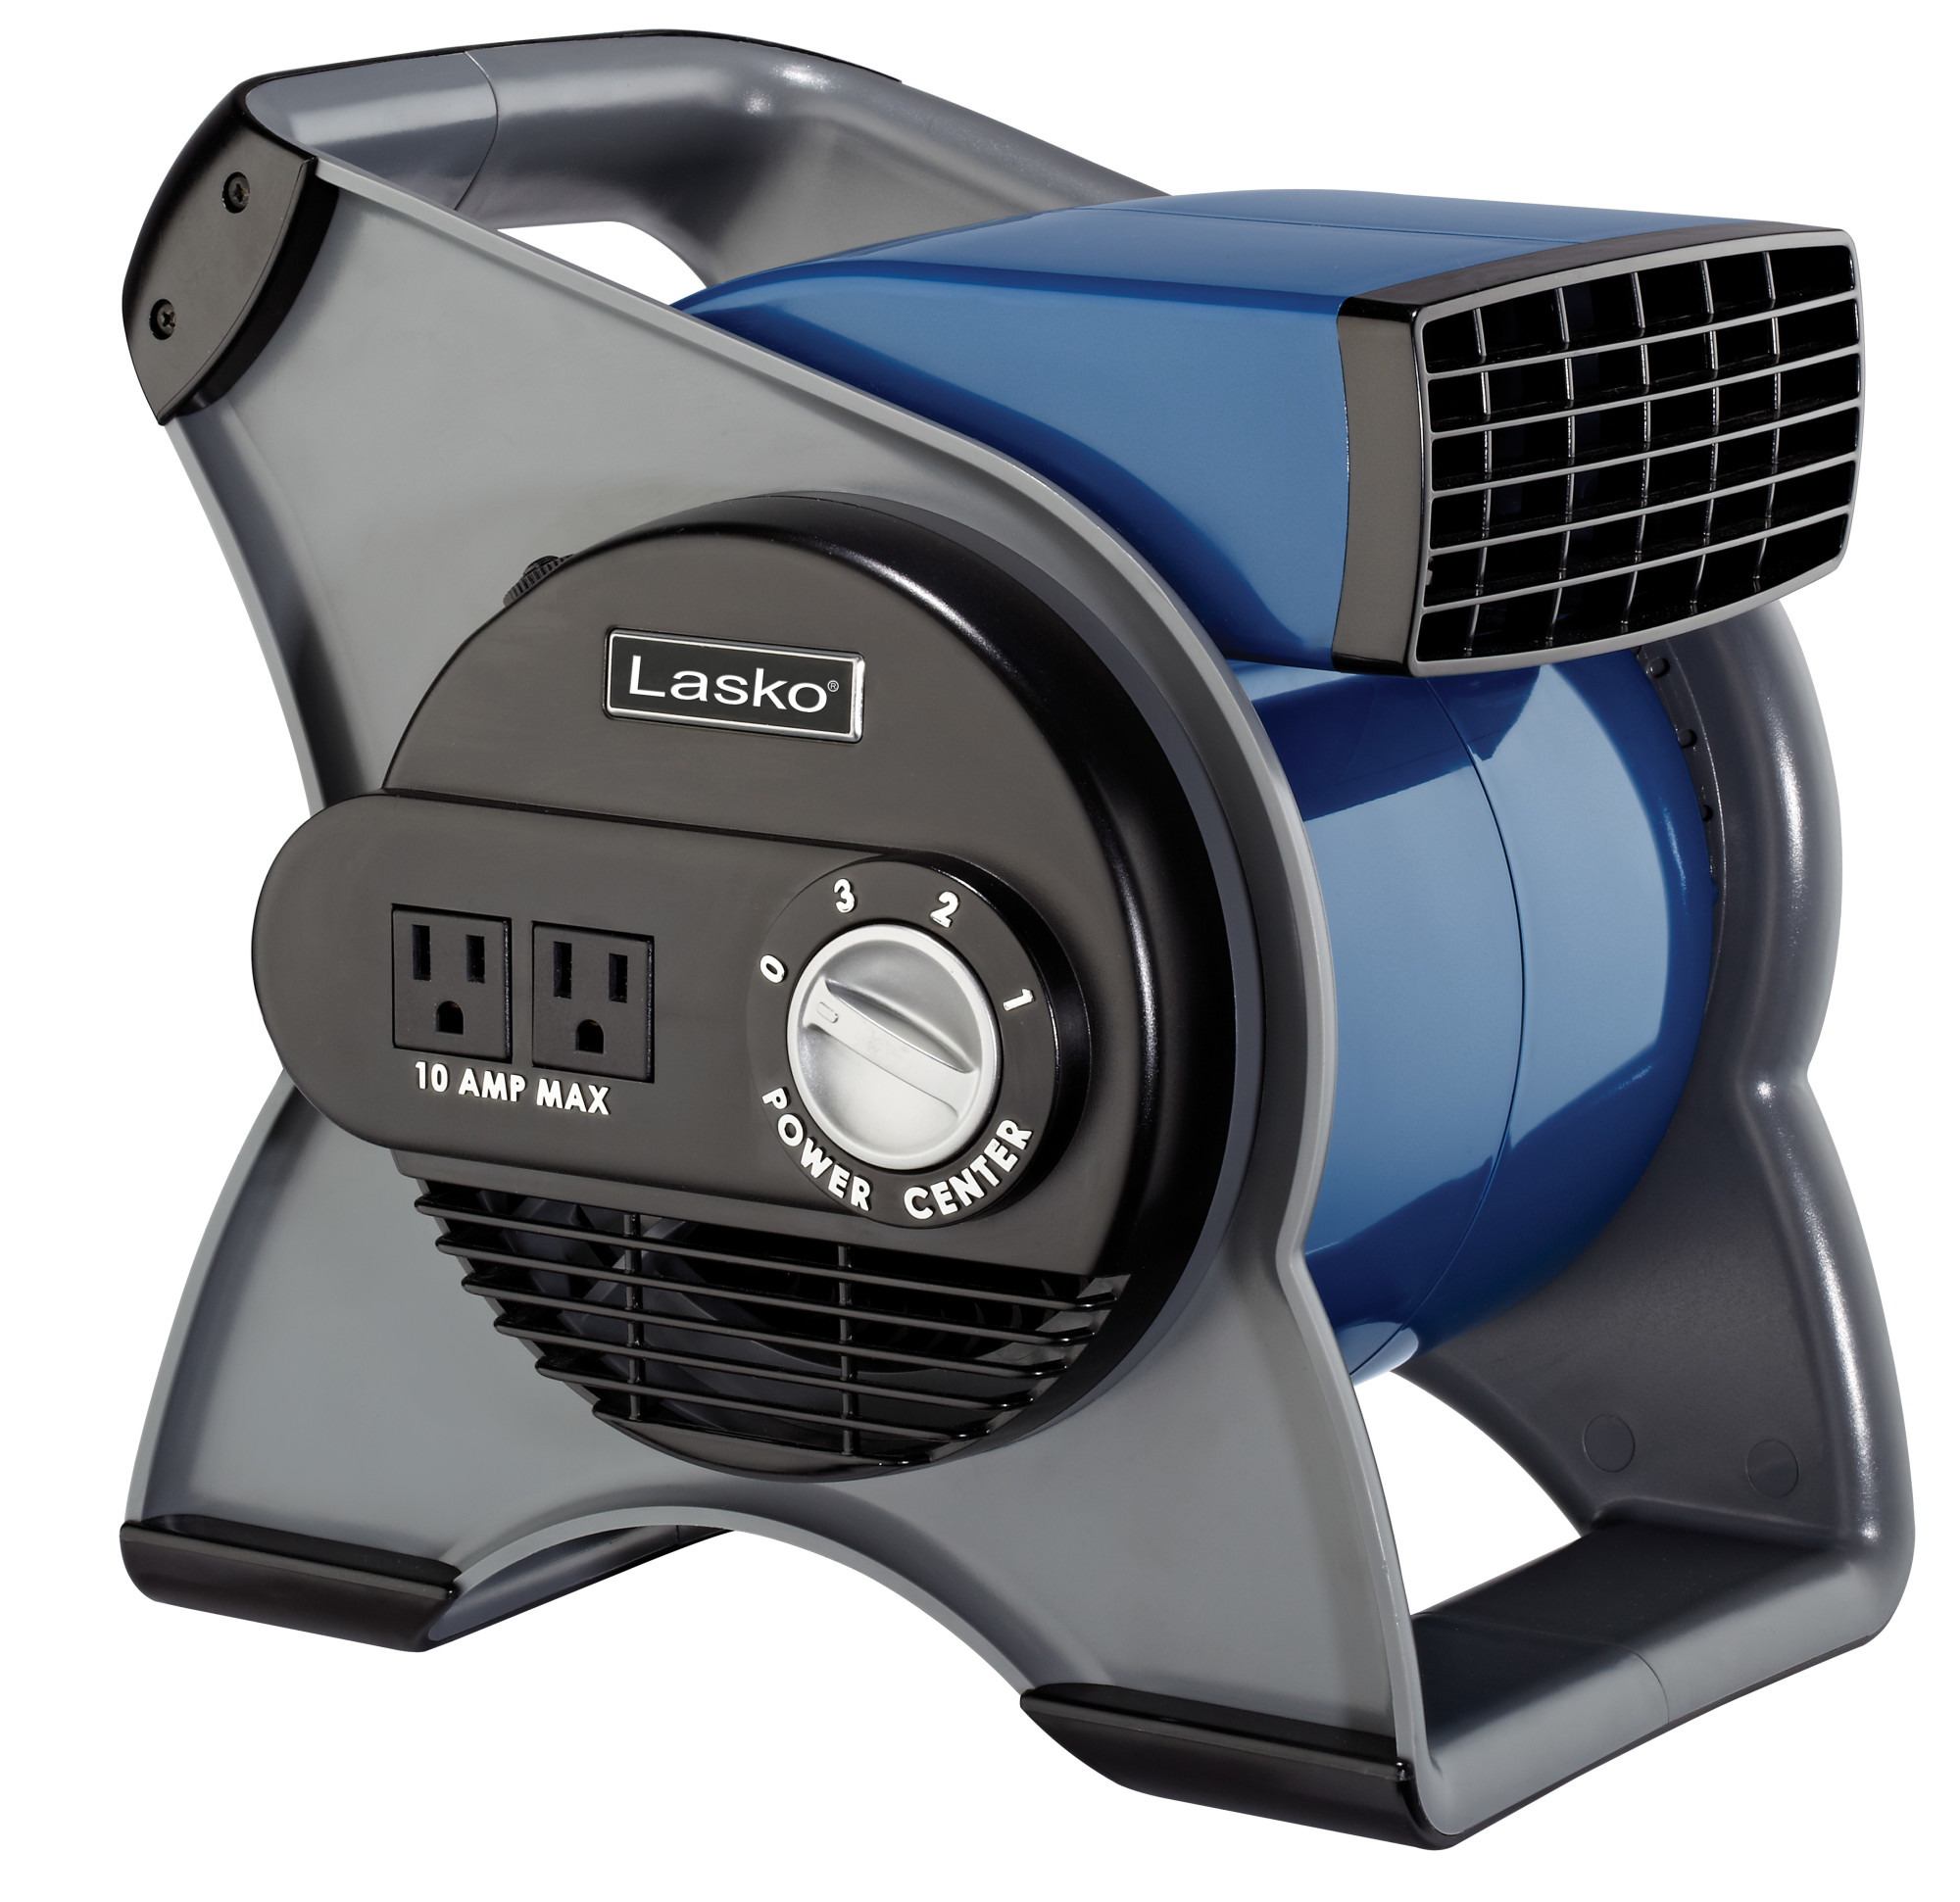 Lasko 11" 3-Speed Multi-Purpose Pivoting Utility Blower Fan with Outlets, Blue, U12100, New - image 1 of 3